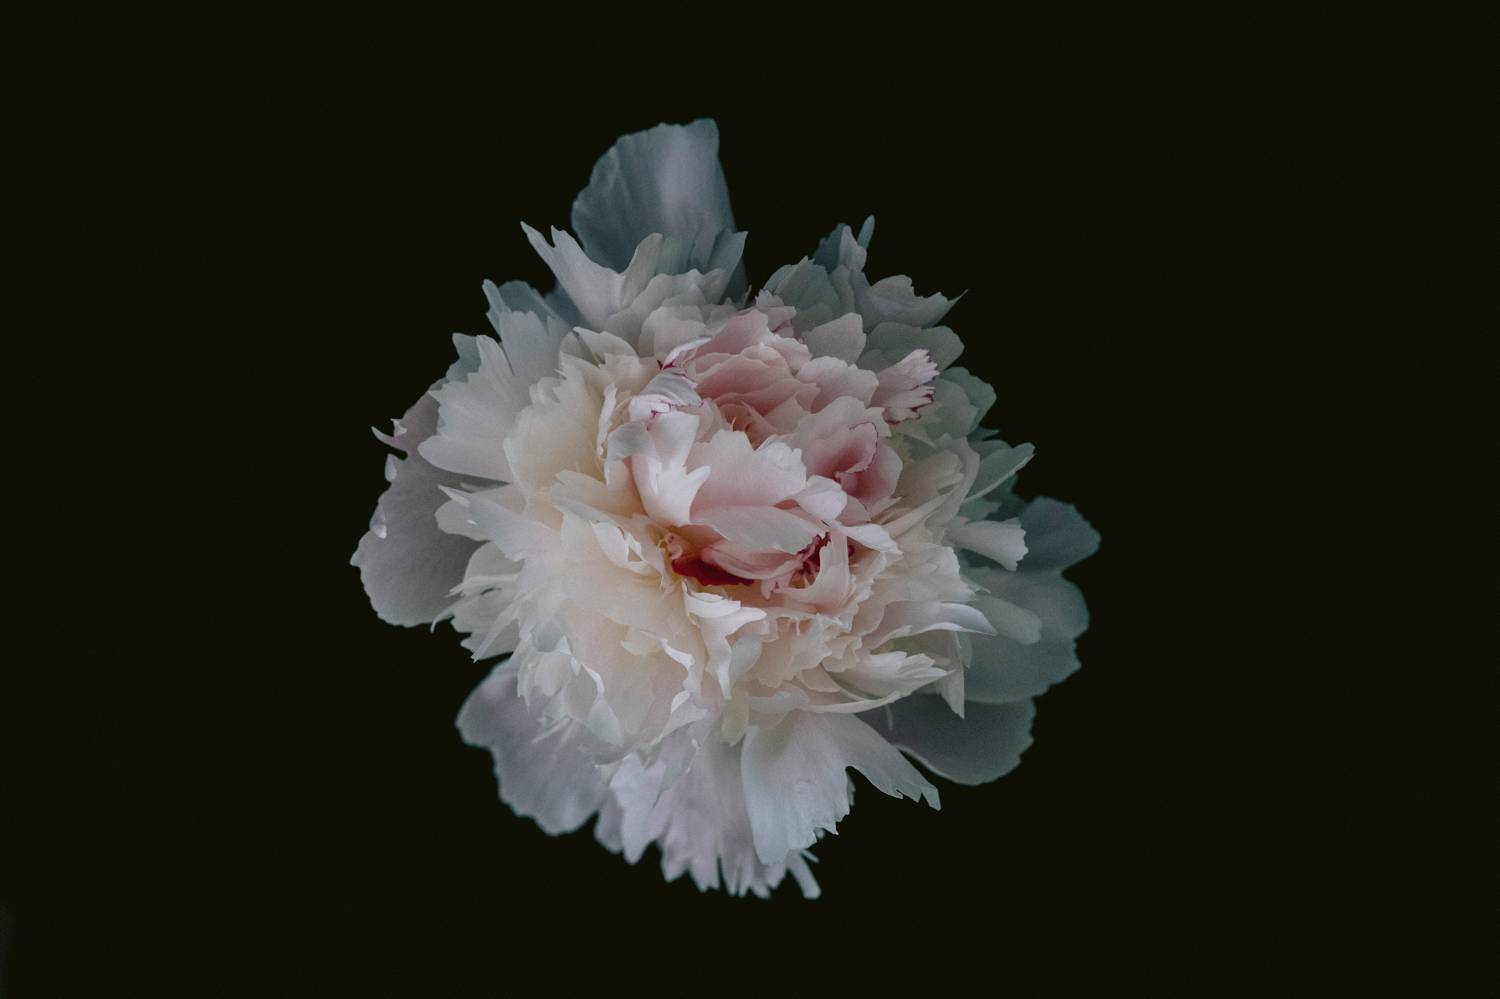 A studio portrait of a blooming rose on a black background. Joshua Wyborn created this fine art photograph as part of his online gallery of canvases and high-quality prints for sale.